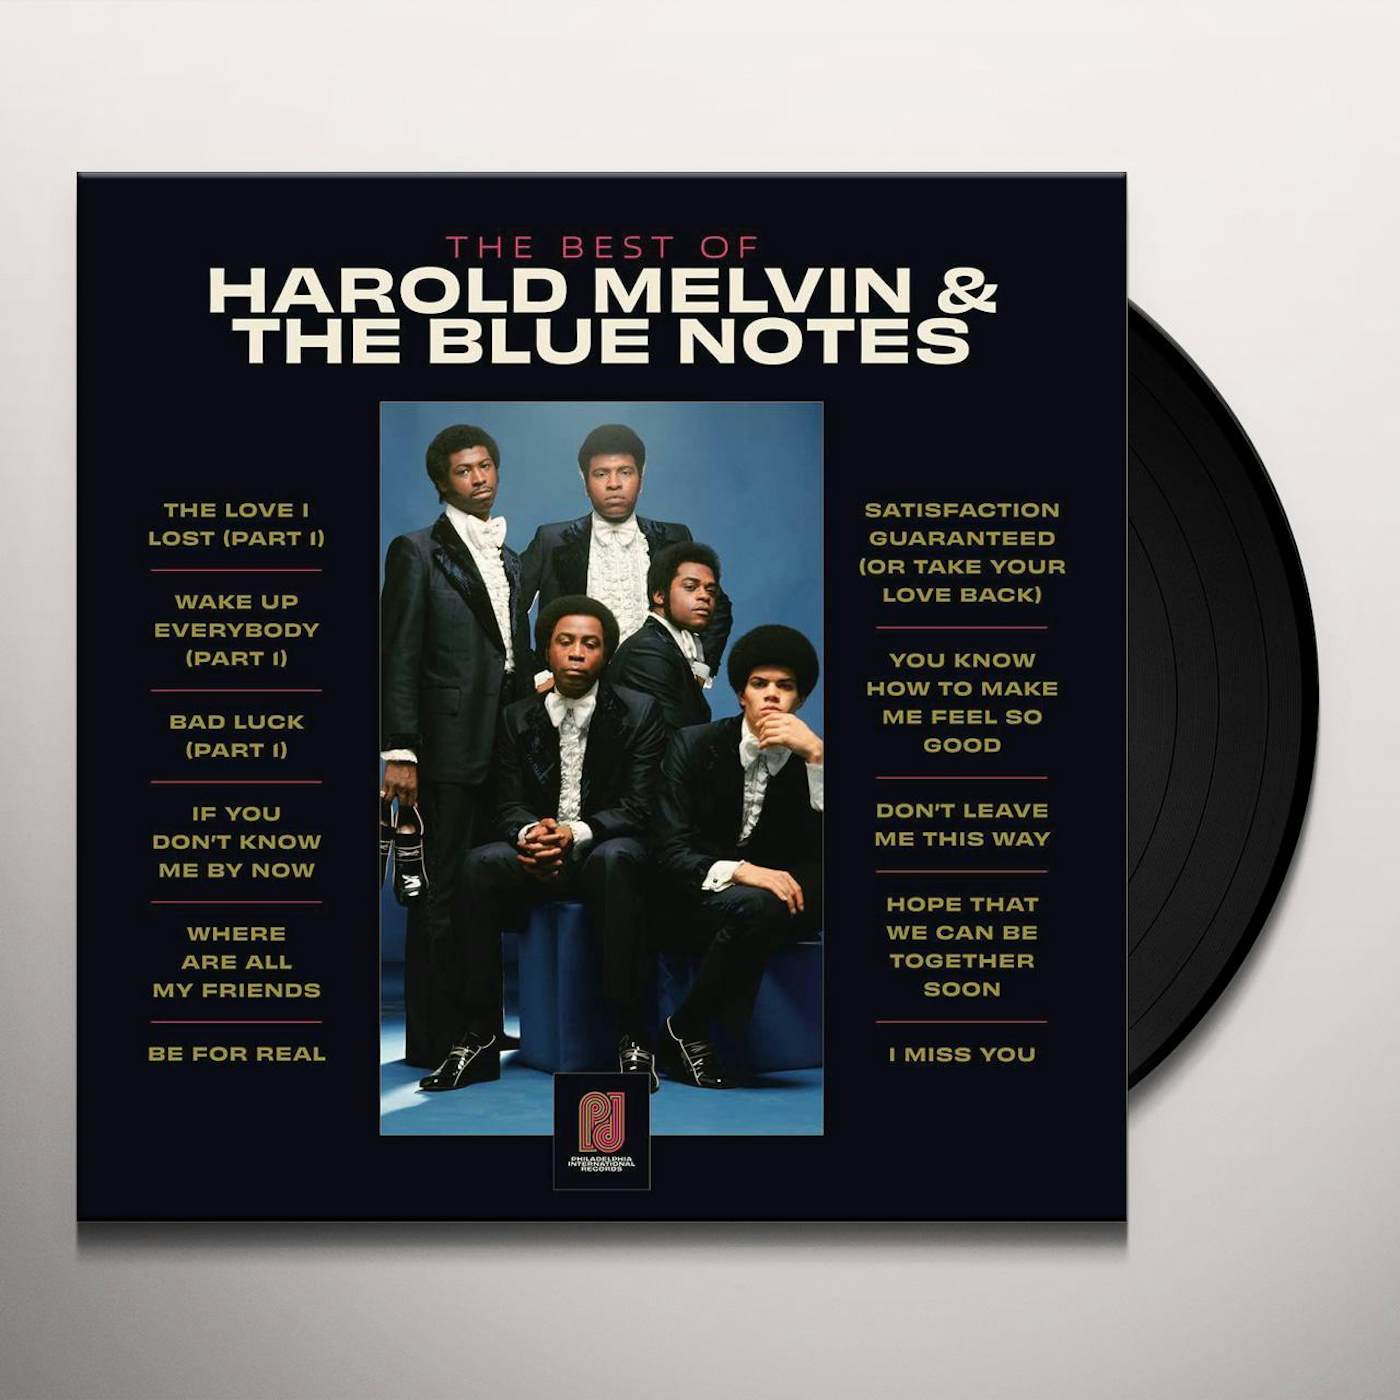 BEST OF HAROLD MELVIN & THE BLUE NOTES Vinyl Record